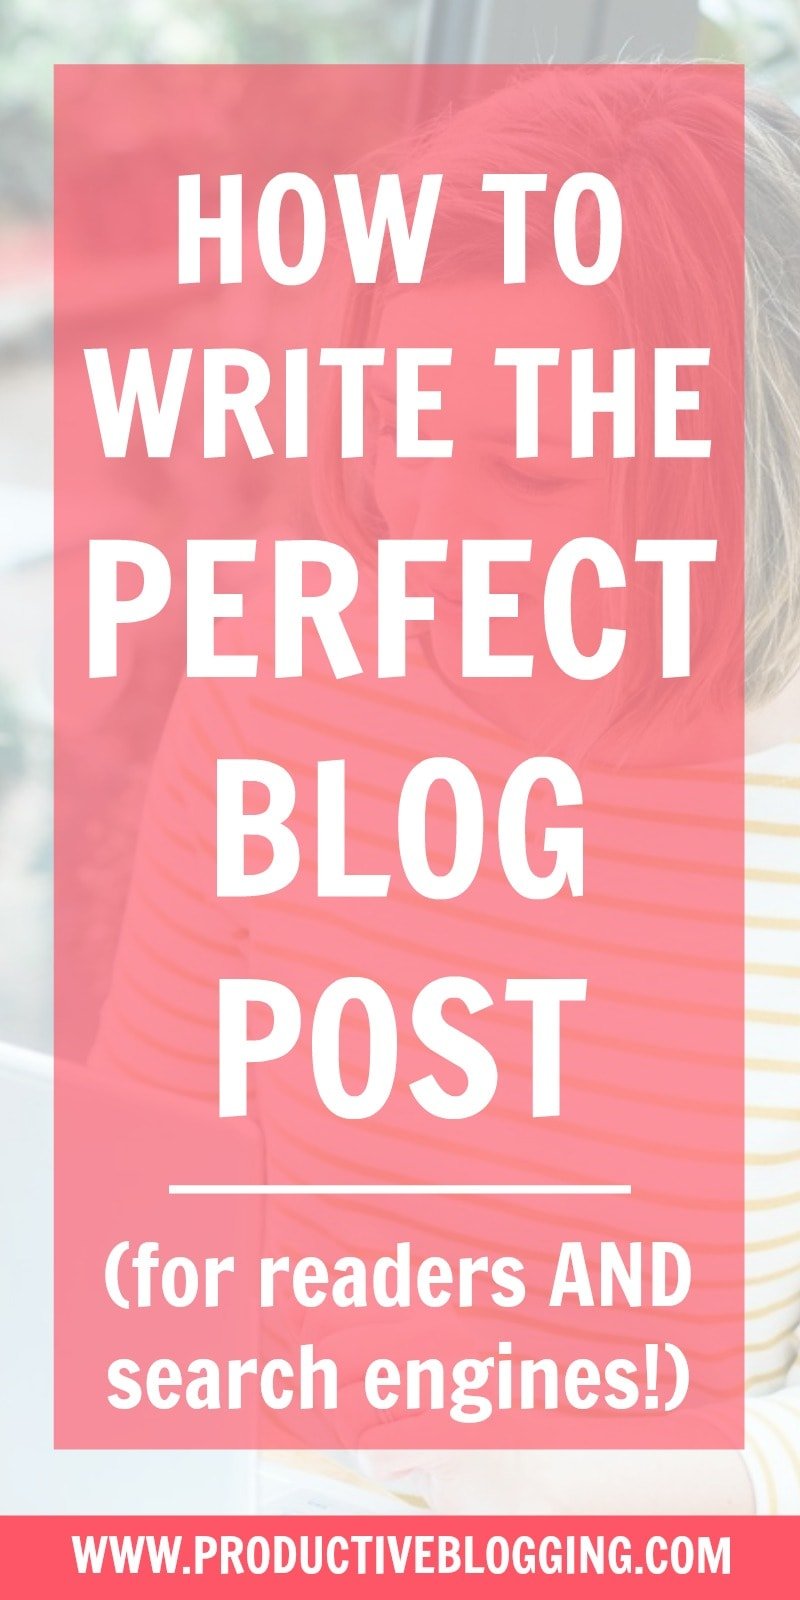 Is it possible to write a great blog post that appeals to your readers AND performs well in search engines? Absolutely! Learn how to write the perfect blog post for SEO AND your readers. #SEO #Yoast #searchengineoptimization #perfectblogpost #blogpost #blogwriting #blogcontent #keywordresearch #Htags #CTA #internallinking #readability #editing #productiveblogging